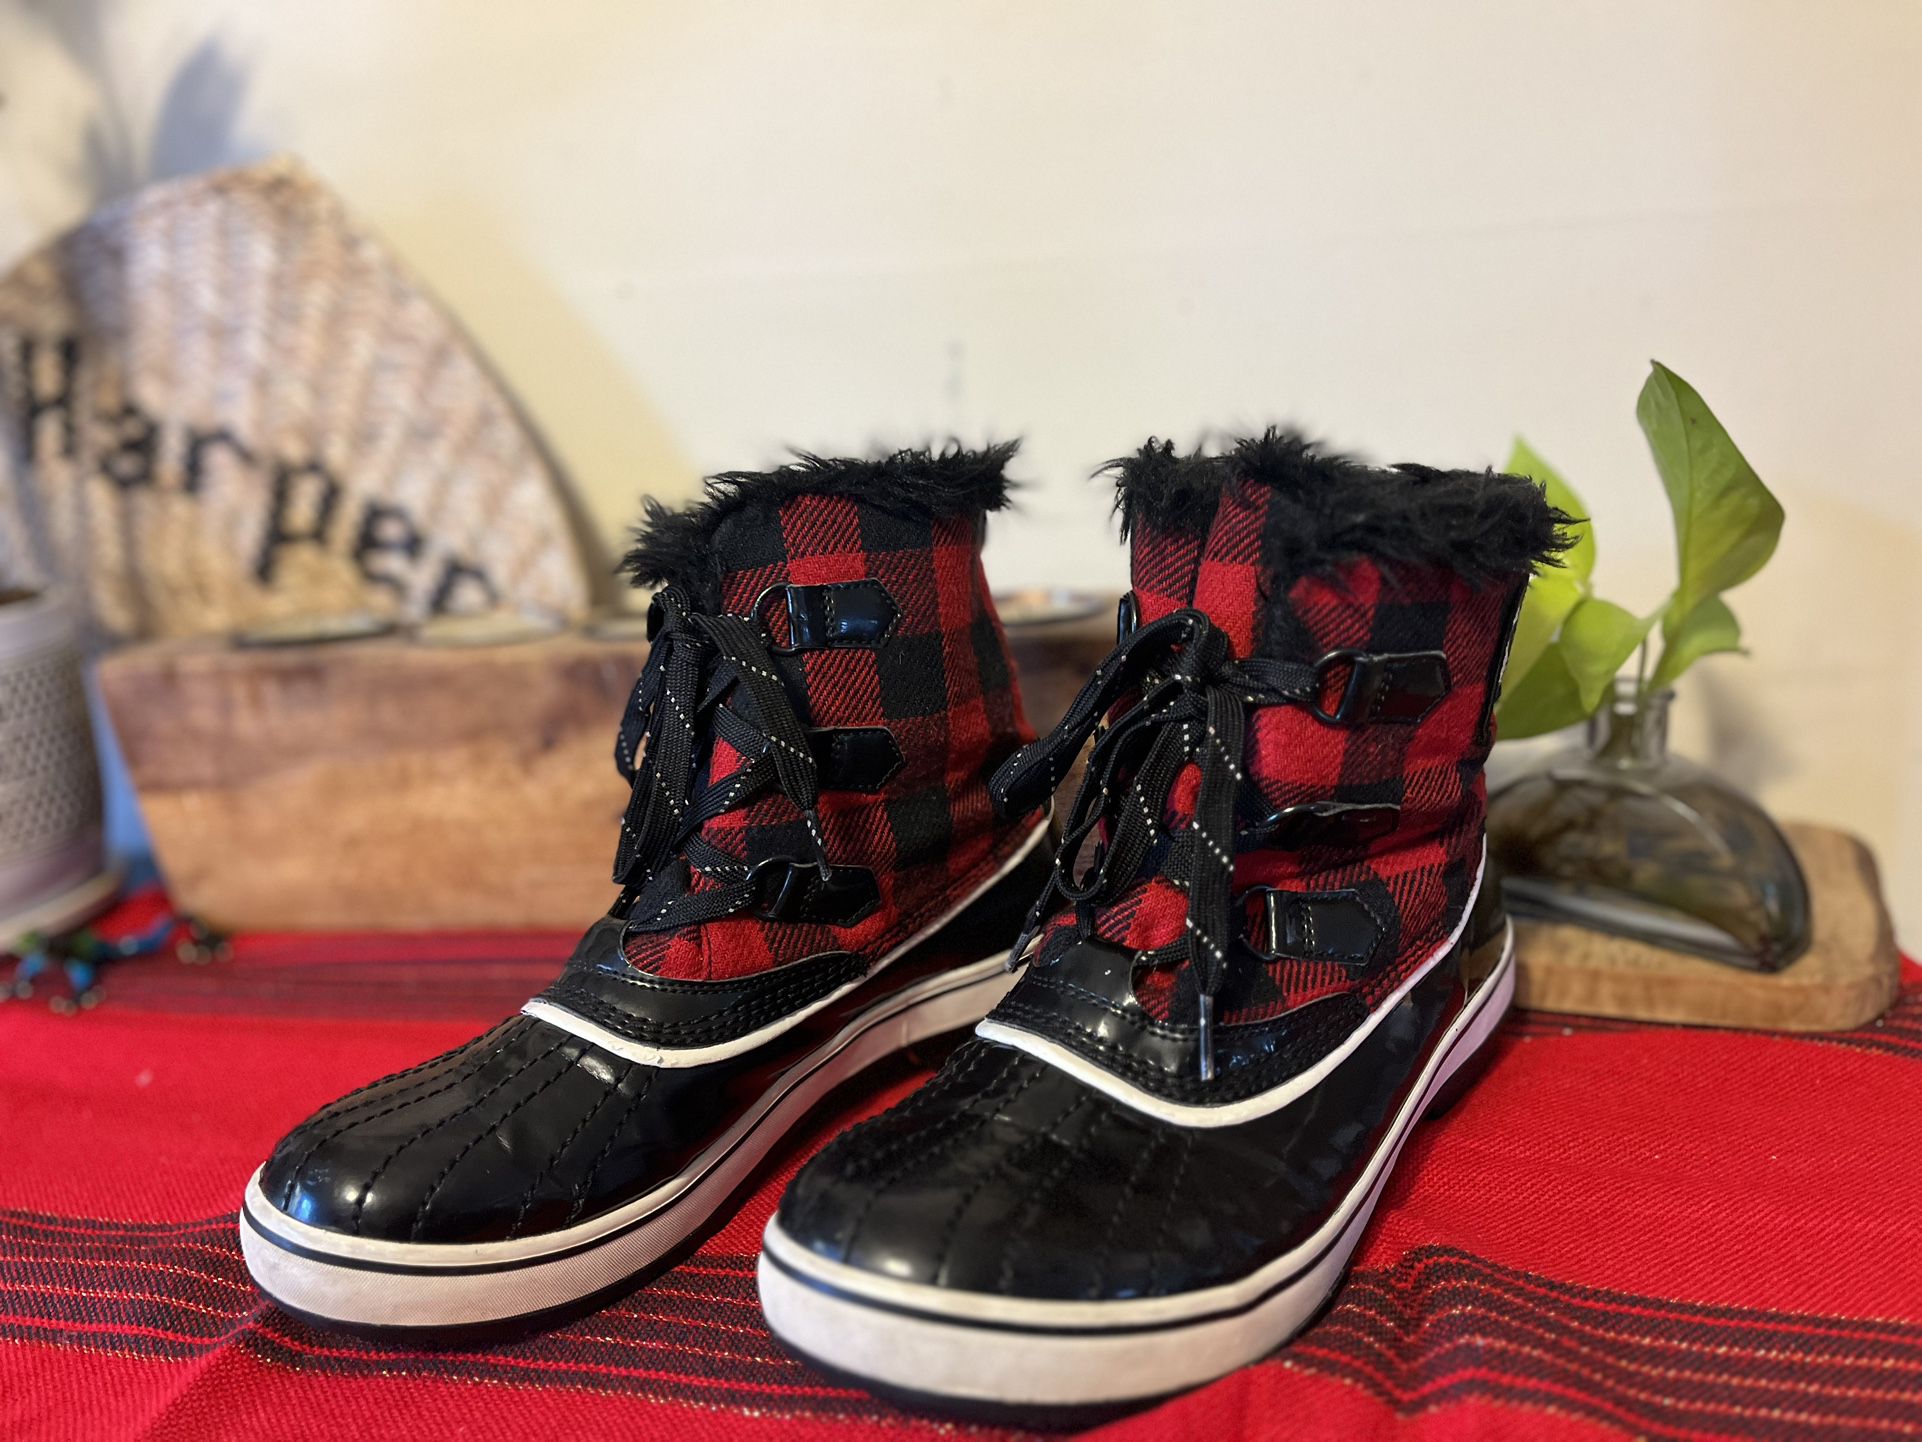 Sorel Out N About Red Buffalo Plaid Winter Rain Mud Duck Boots Size 9.5